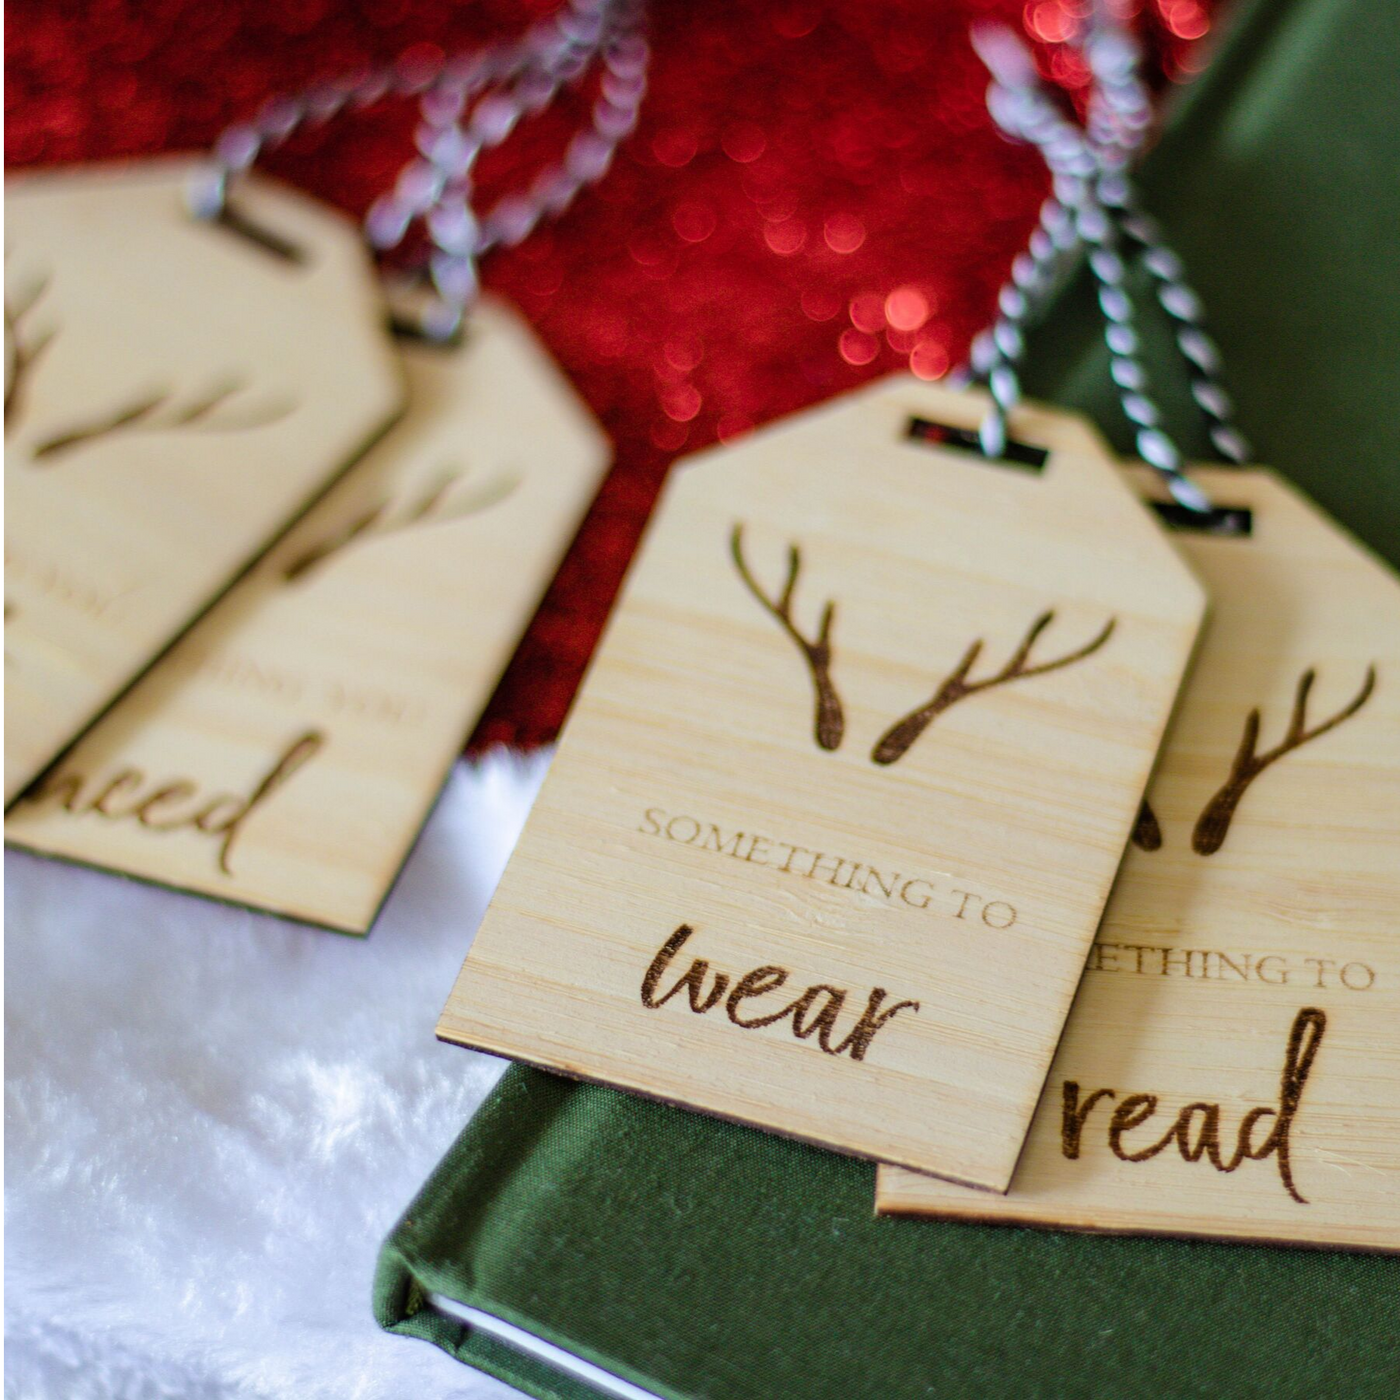 Stag Need Read Want Wear Gift Tags